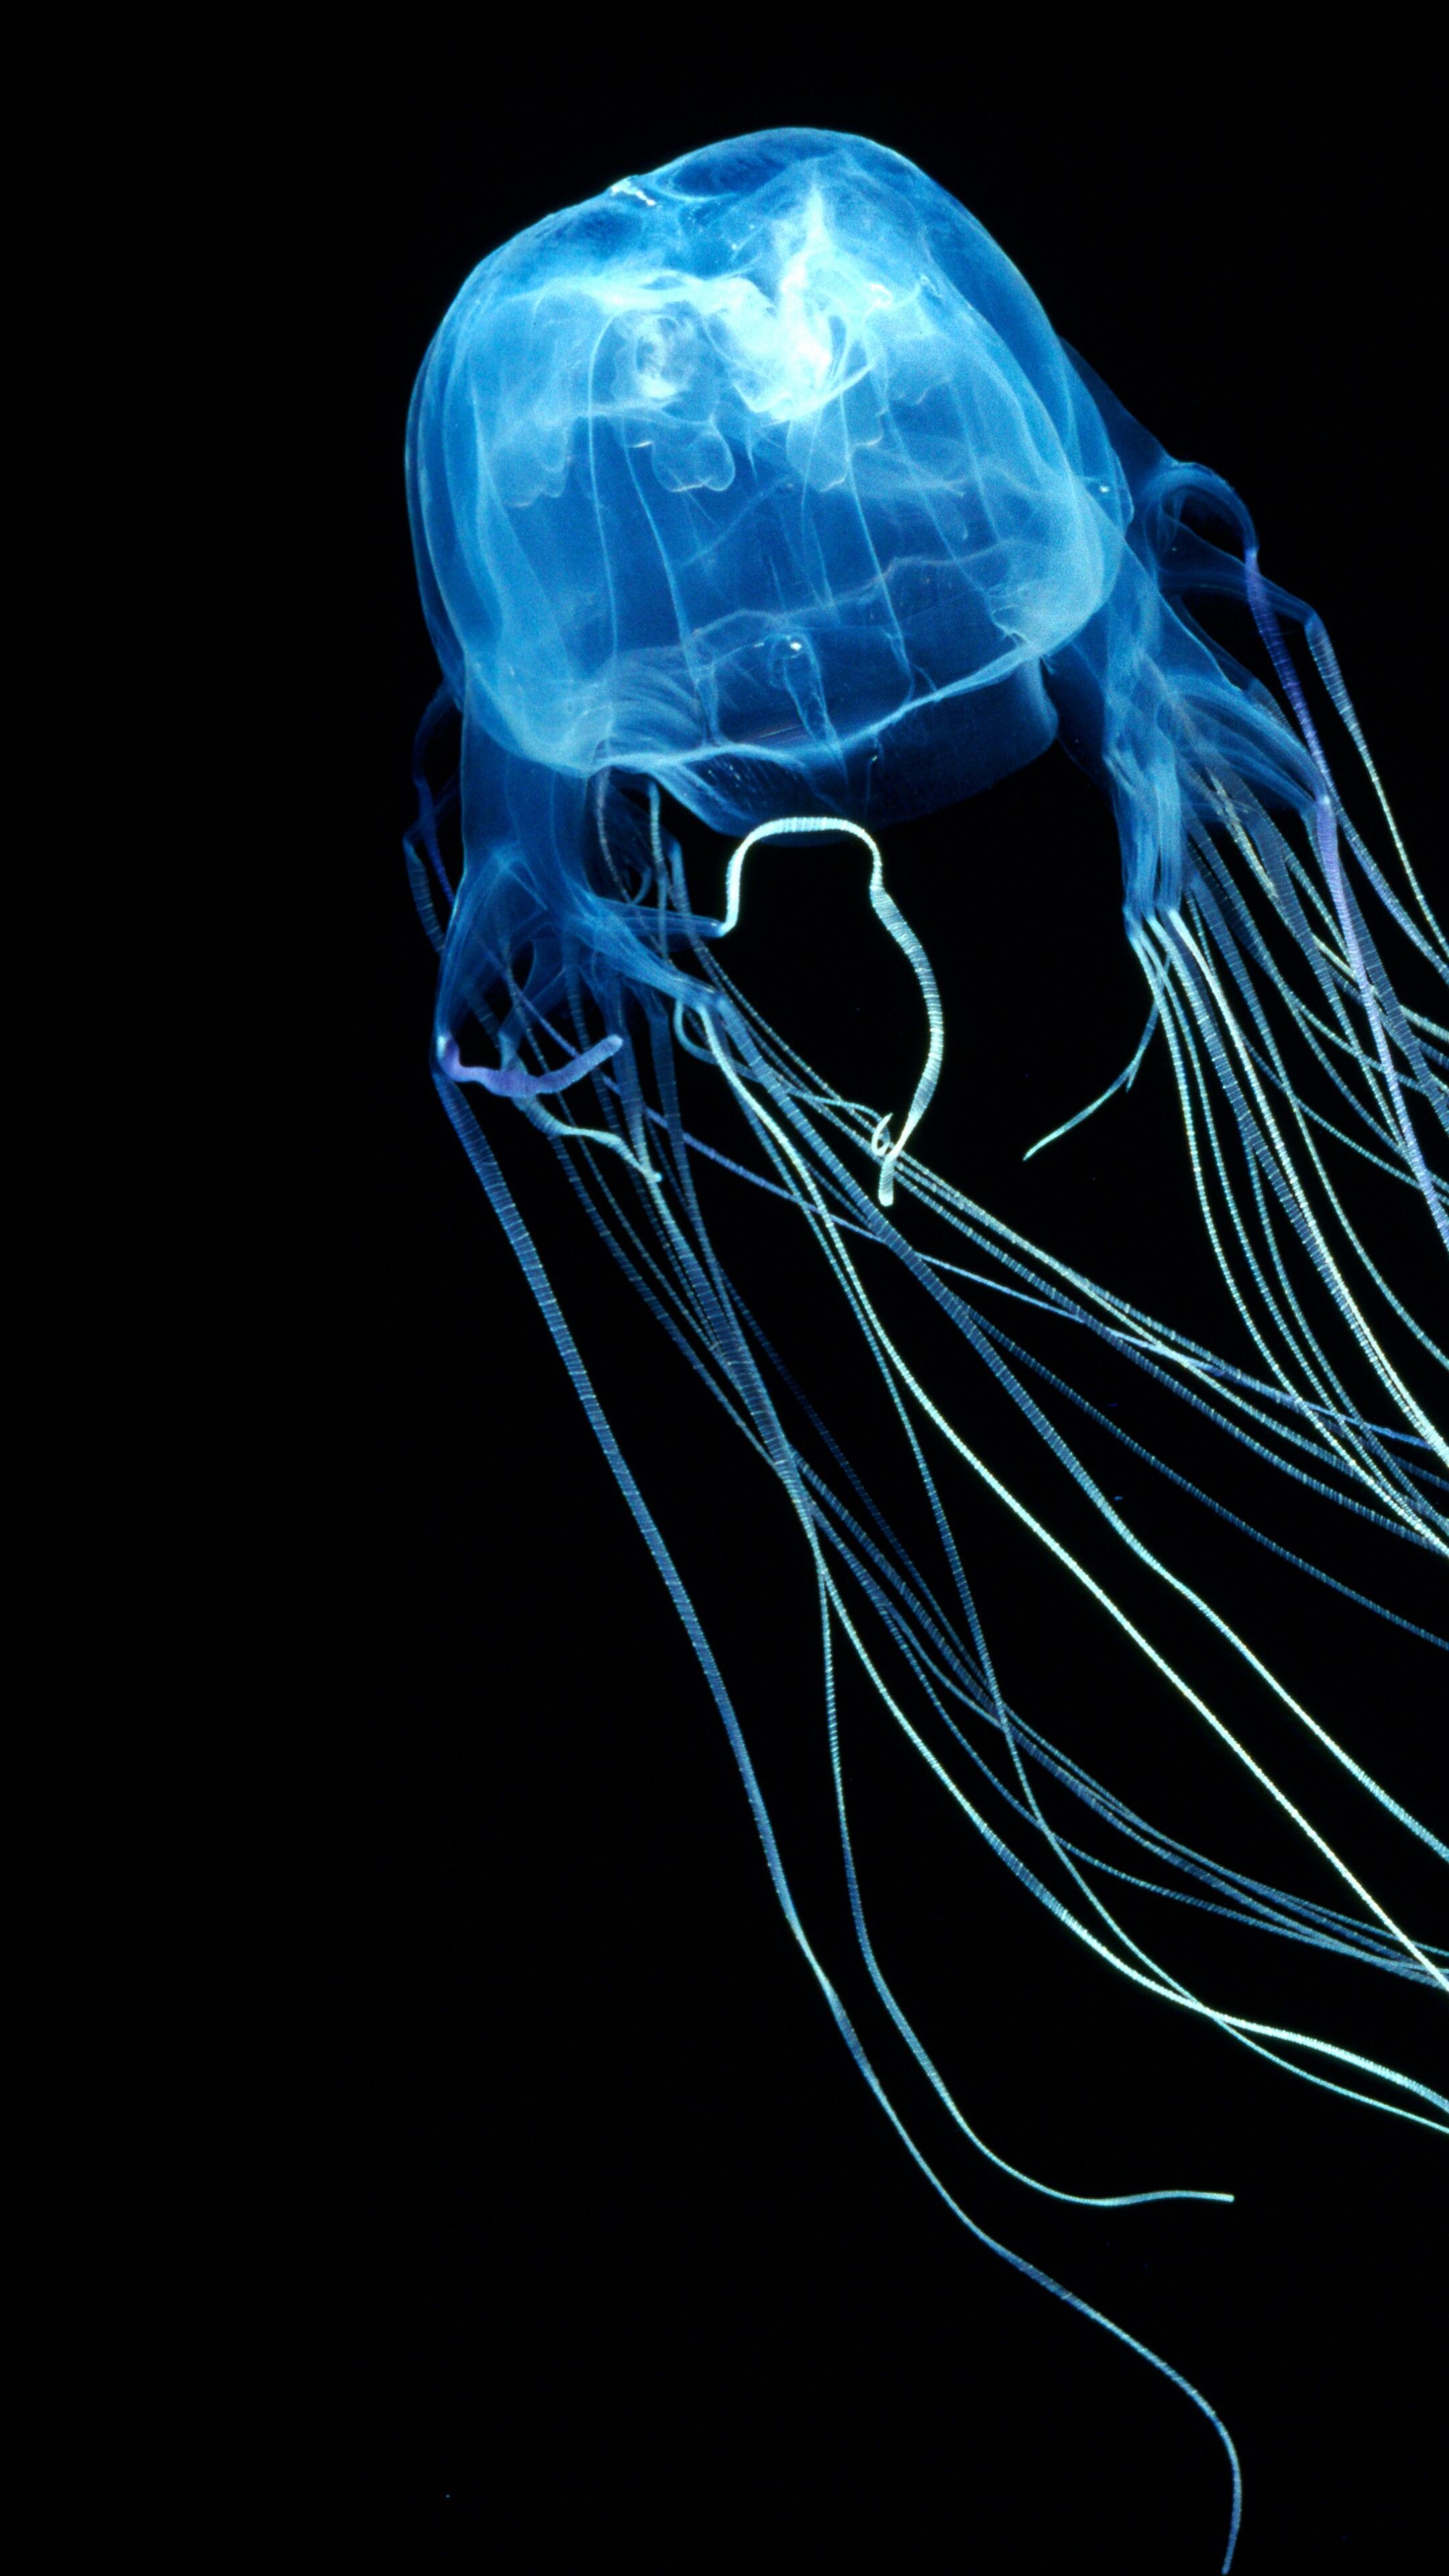 Glowing Jellyfish: Blue light produced by a chemical process within a living organism, Hydromedusa. 2160x3840 4K Wallpaper.